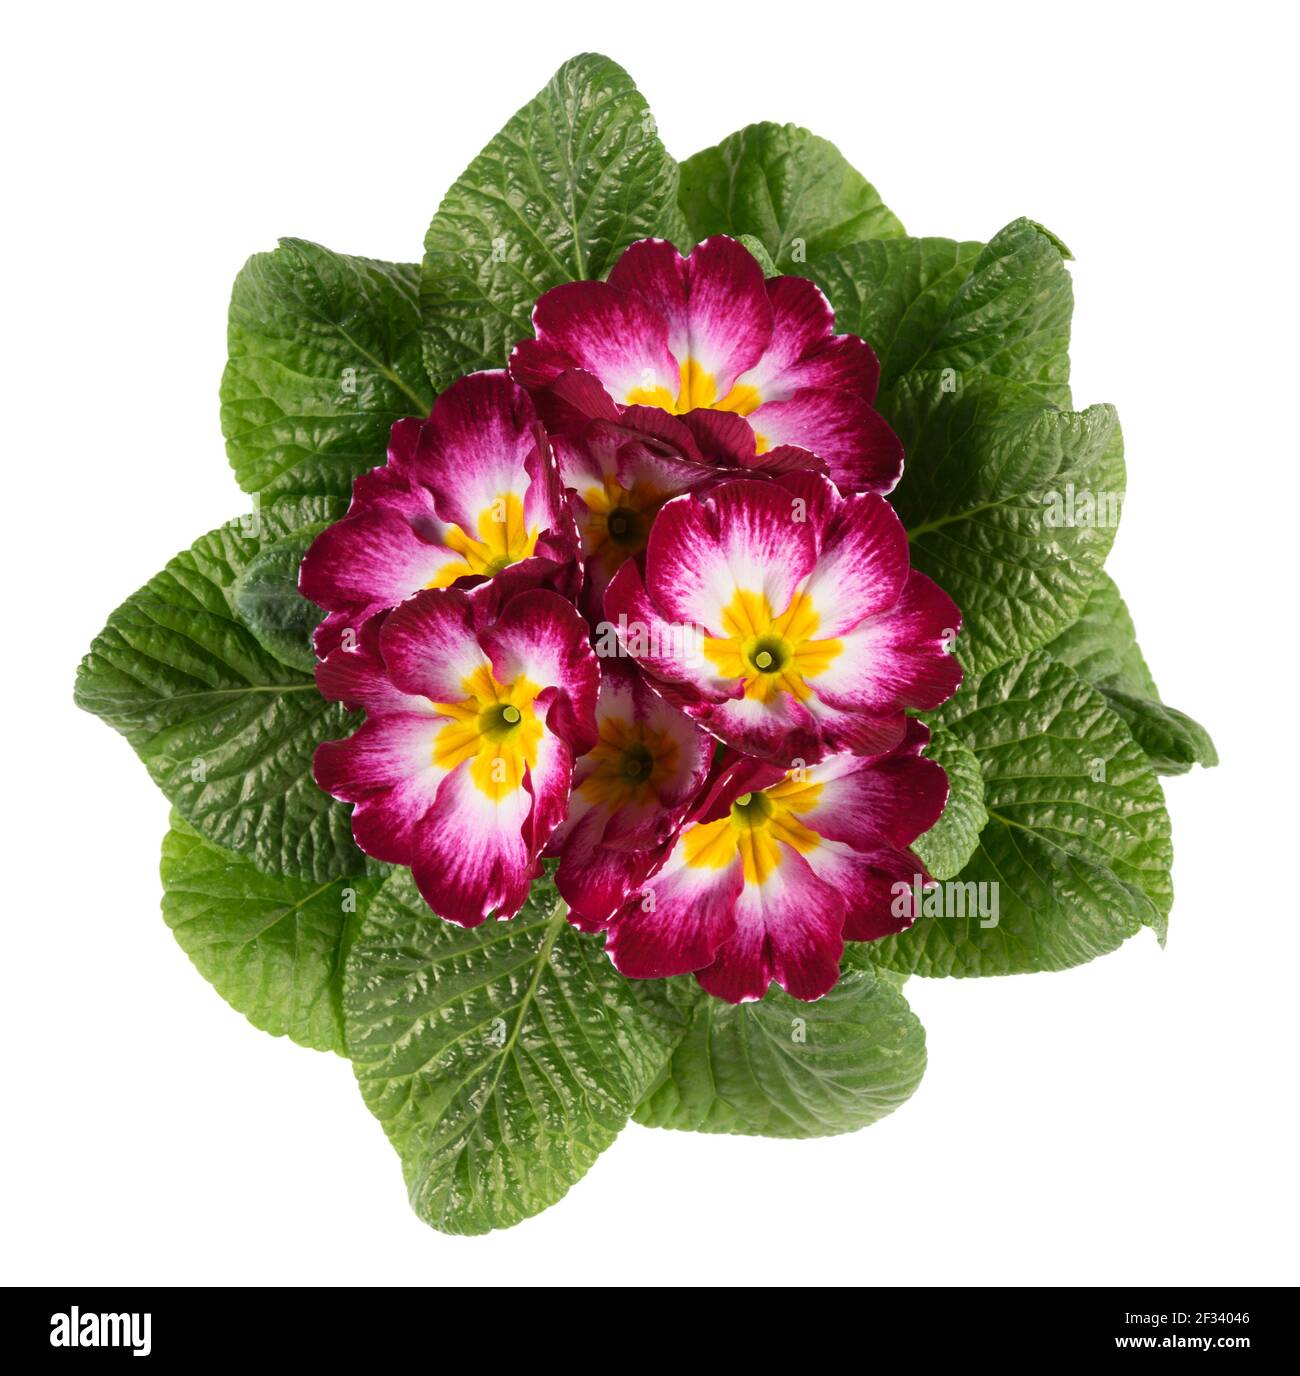 Overhead view of a variegated tricolor violet primrose white and yellow surrounded by a rosette of green leaves isolated on white Stock Photo